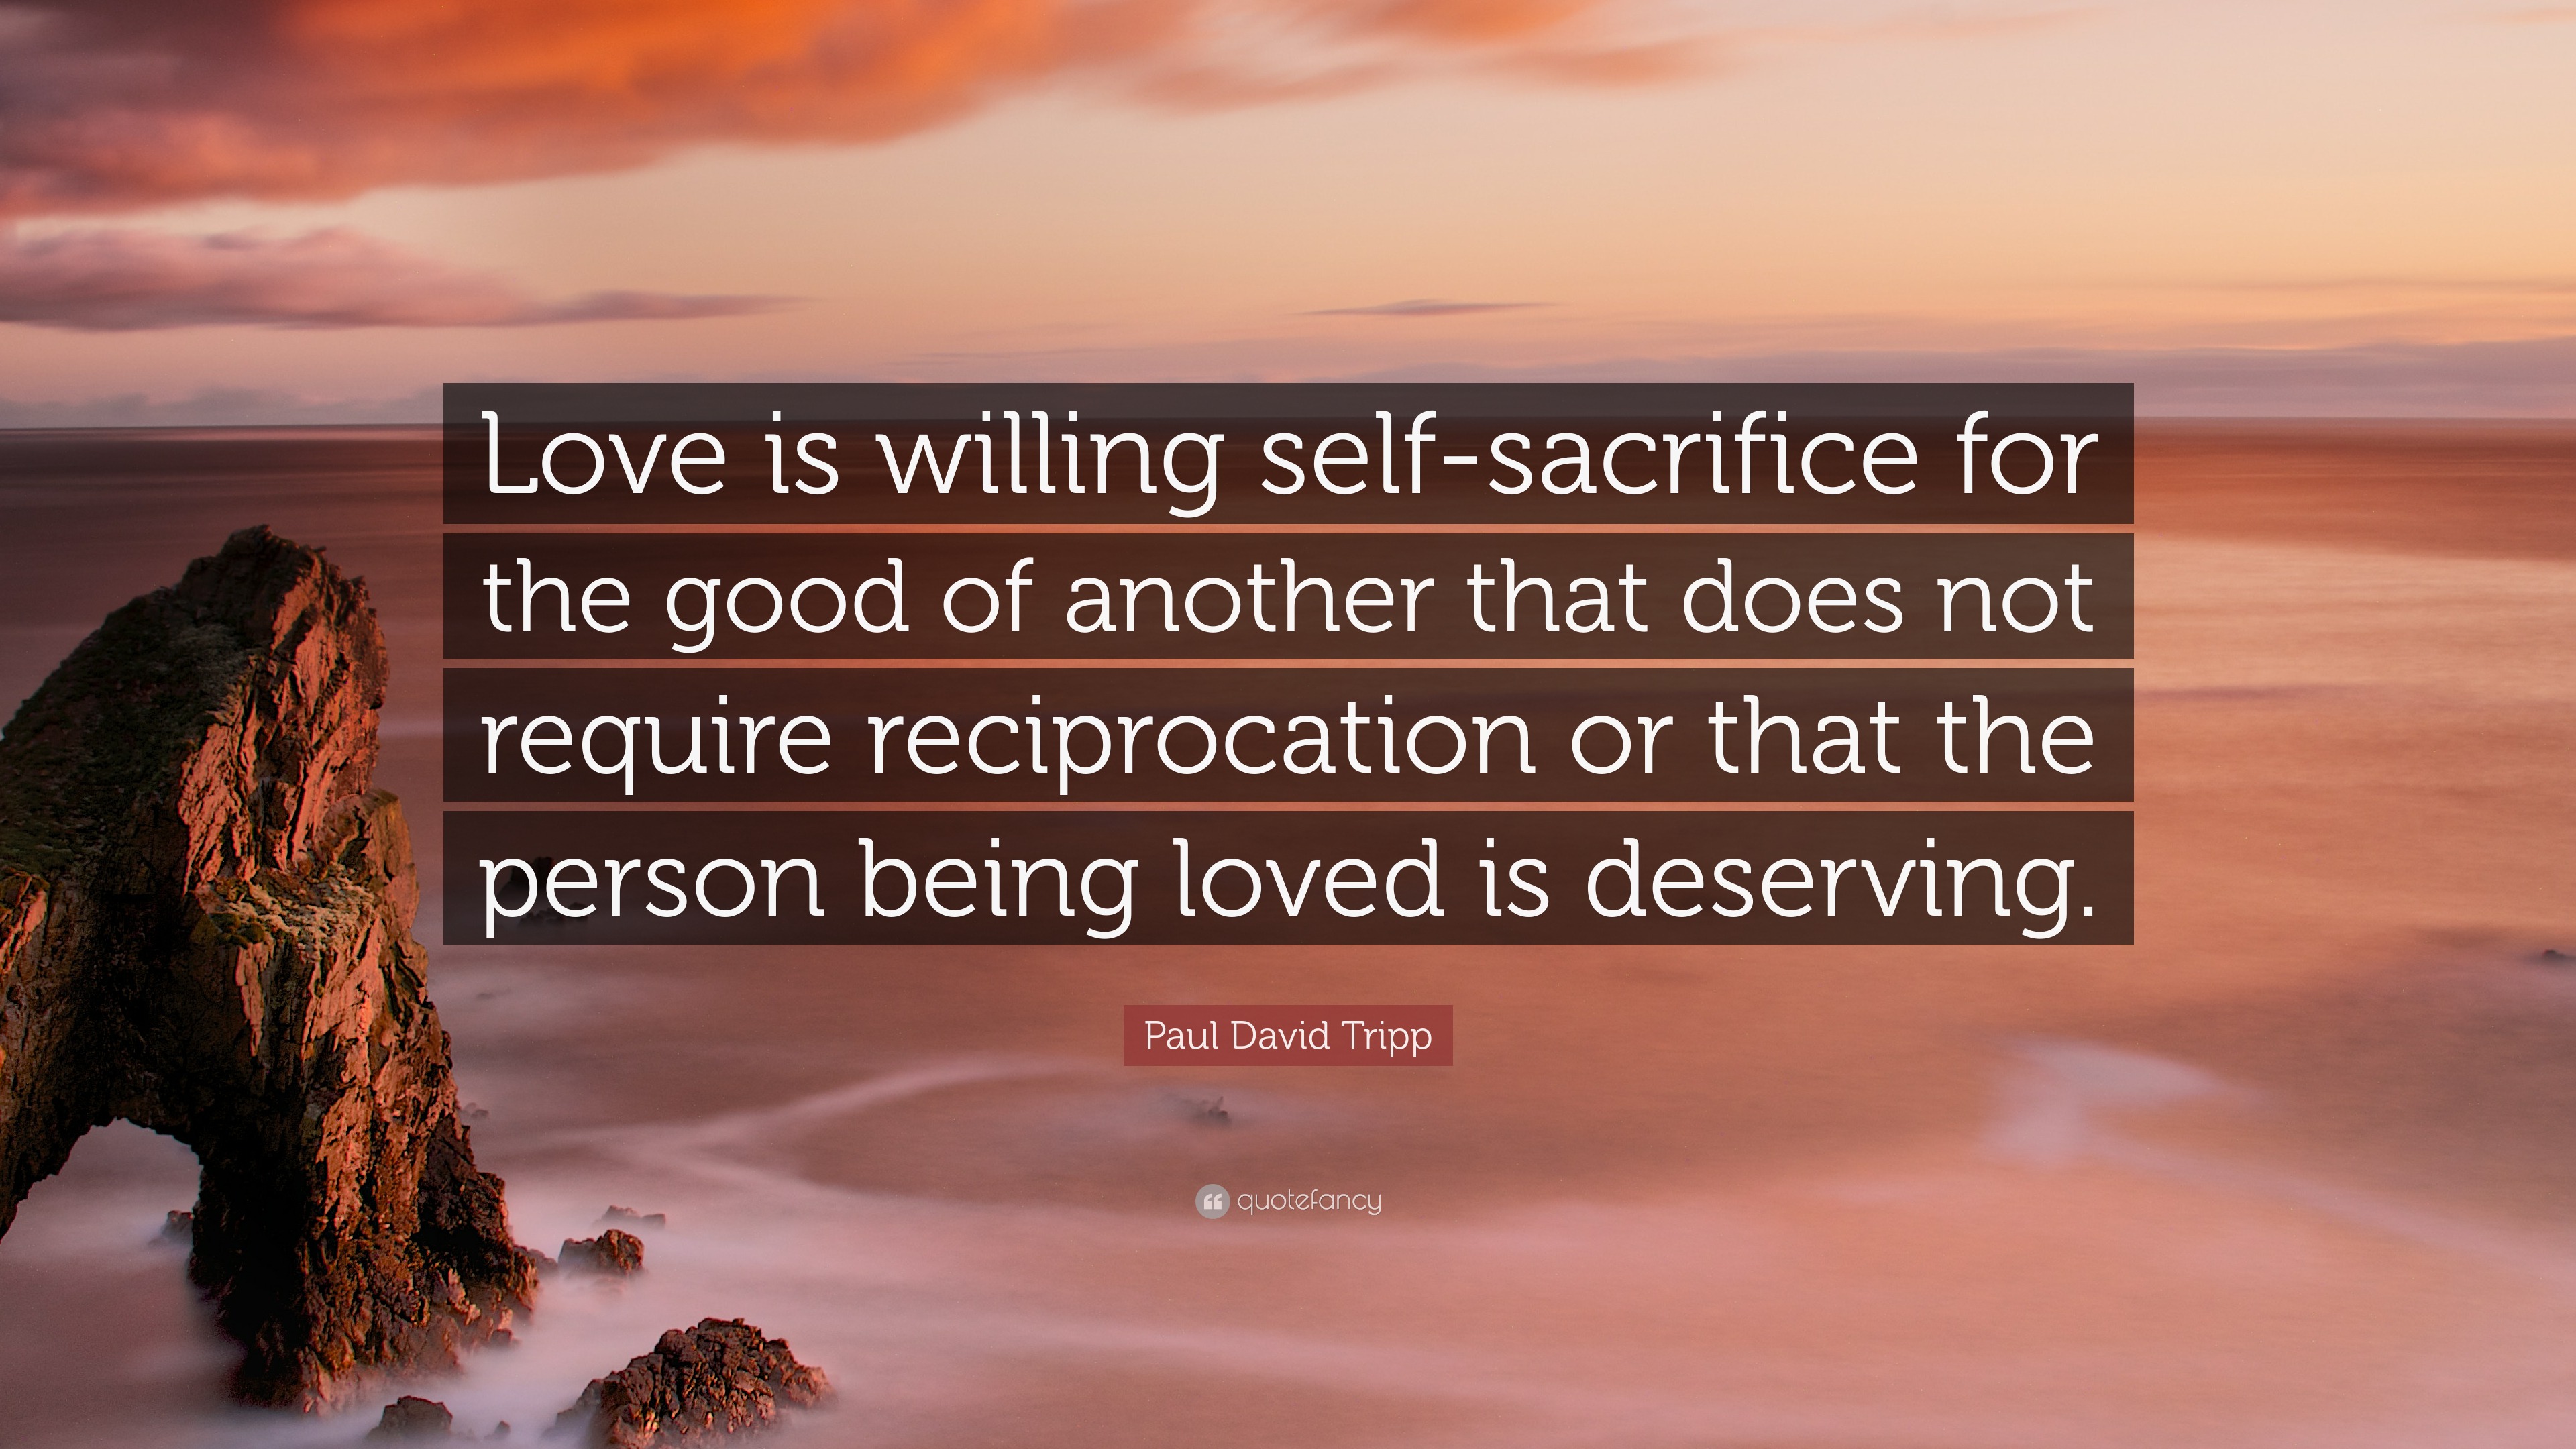 Paul David Tripp Quote: “Love is willing self-sacrifice for the good of ...